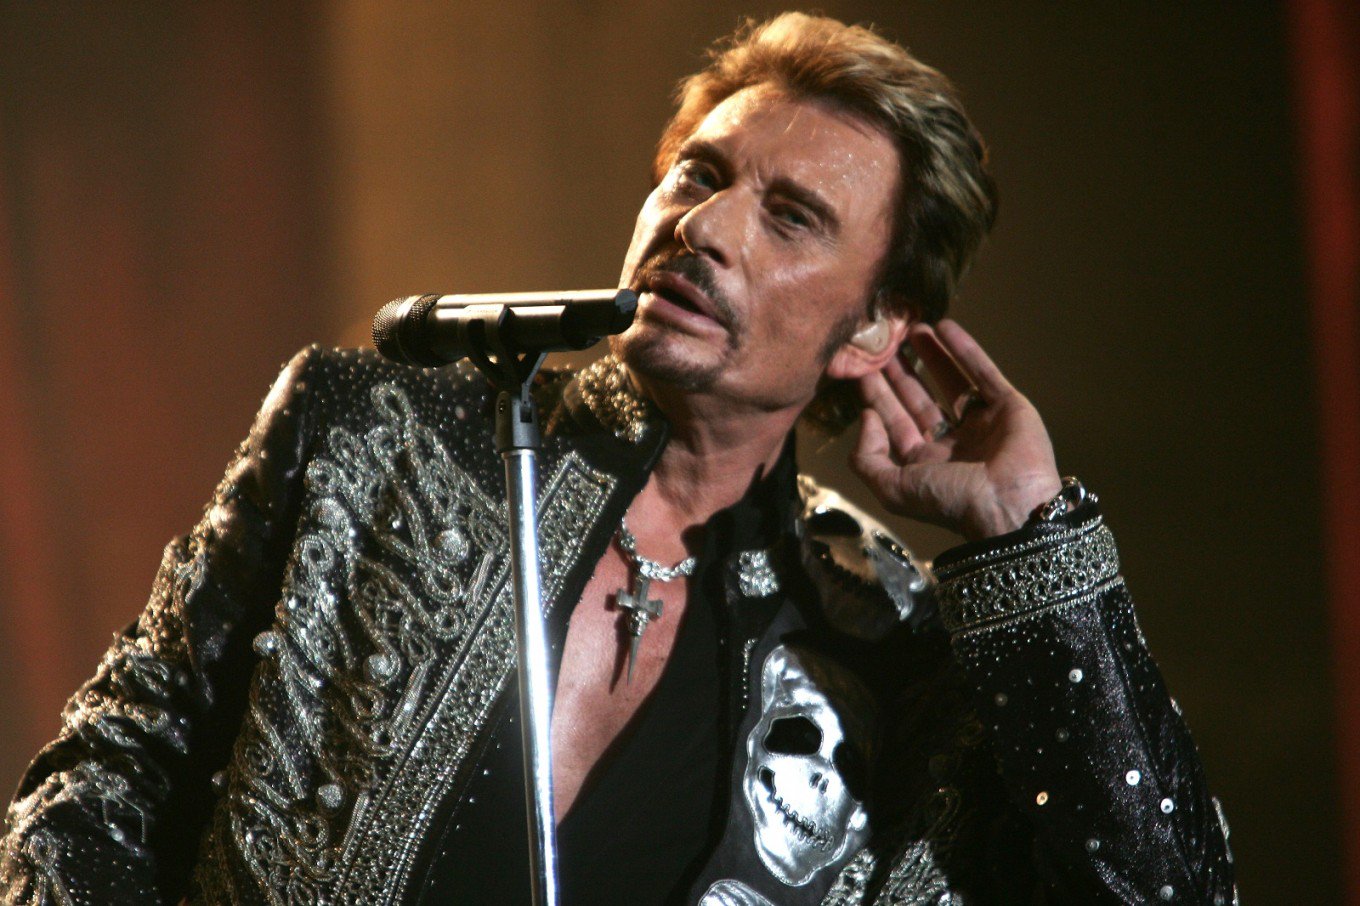 French rock and roll star, Johnny Hallyday dies aged 74